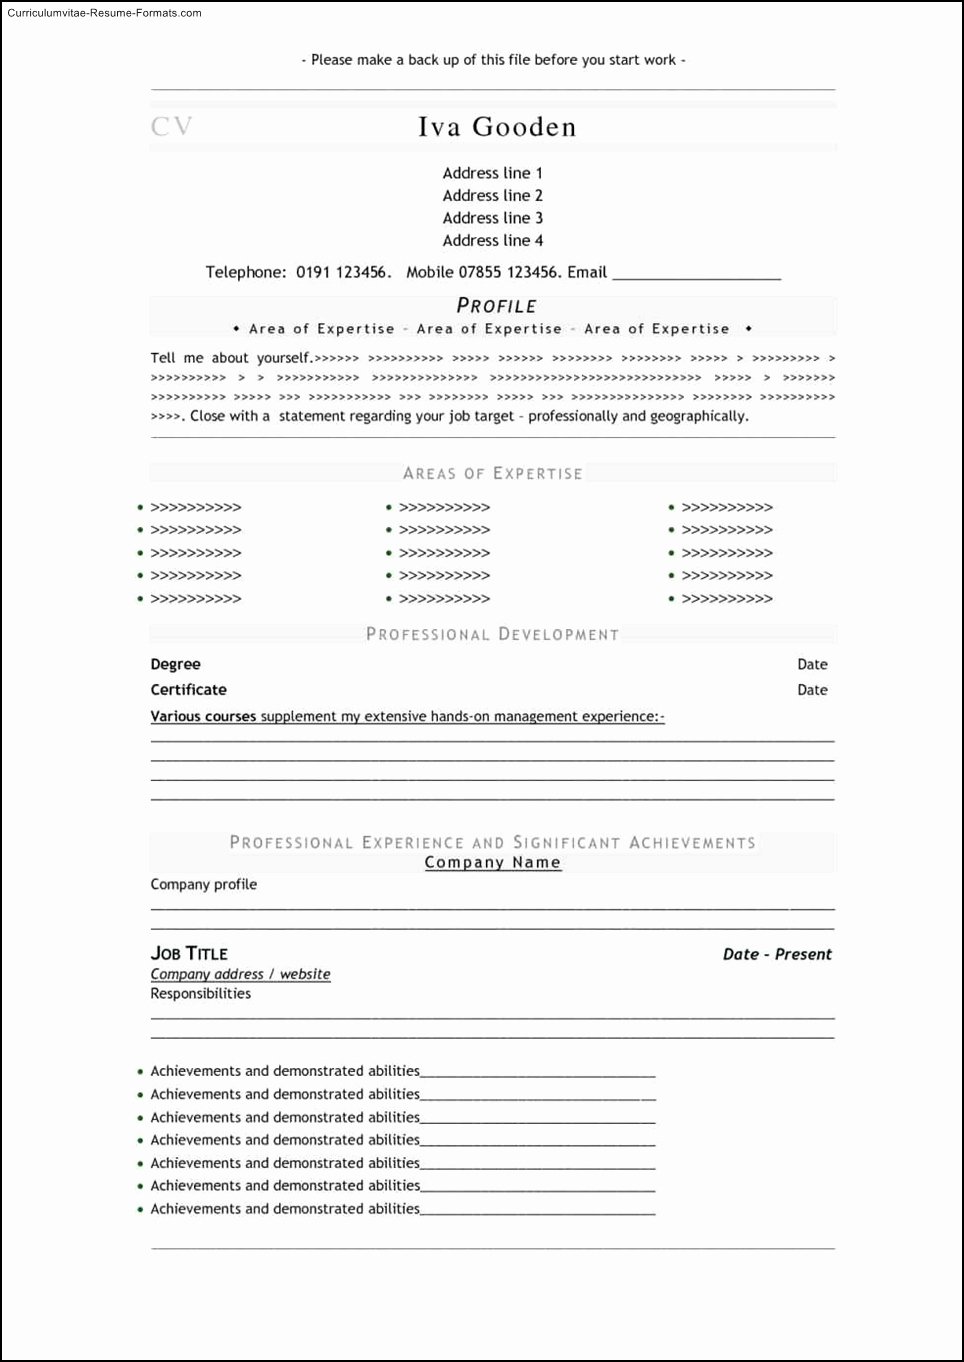 Download Free Professional Resume Templates